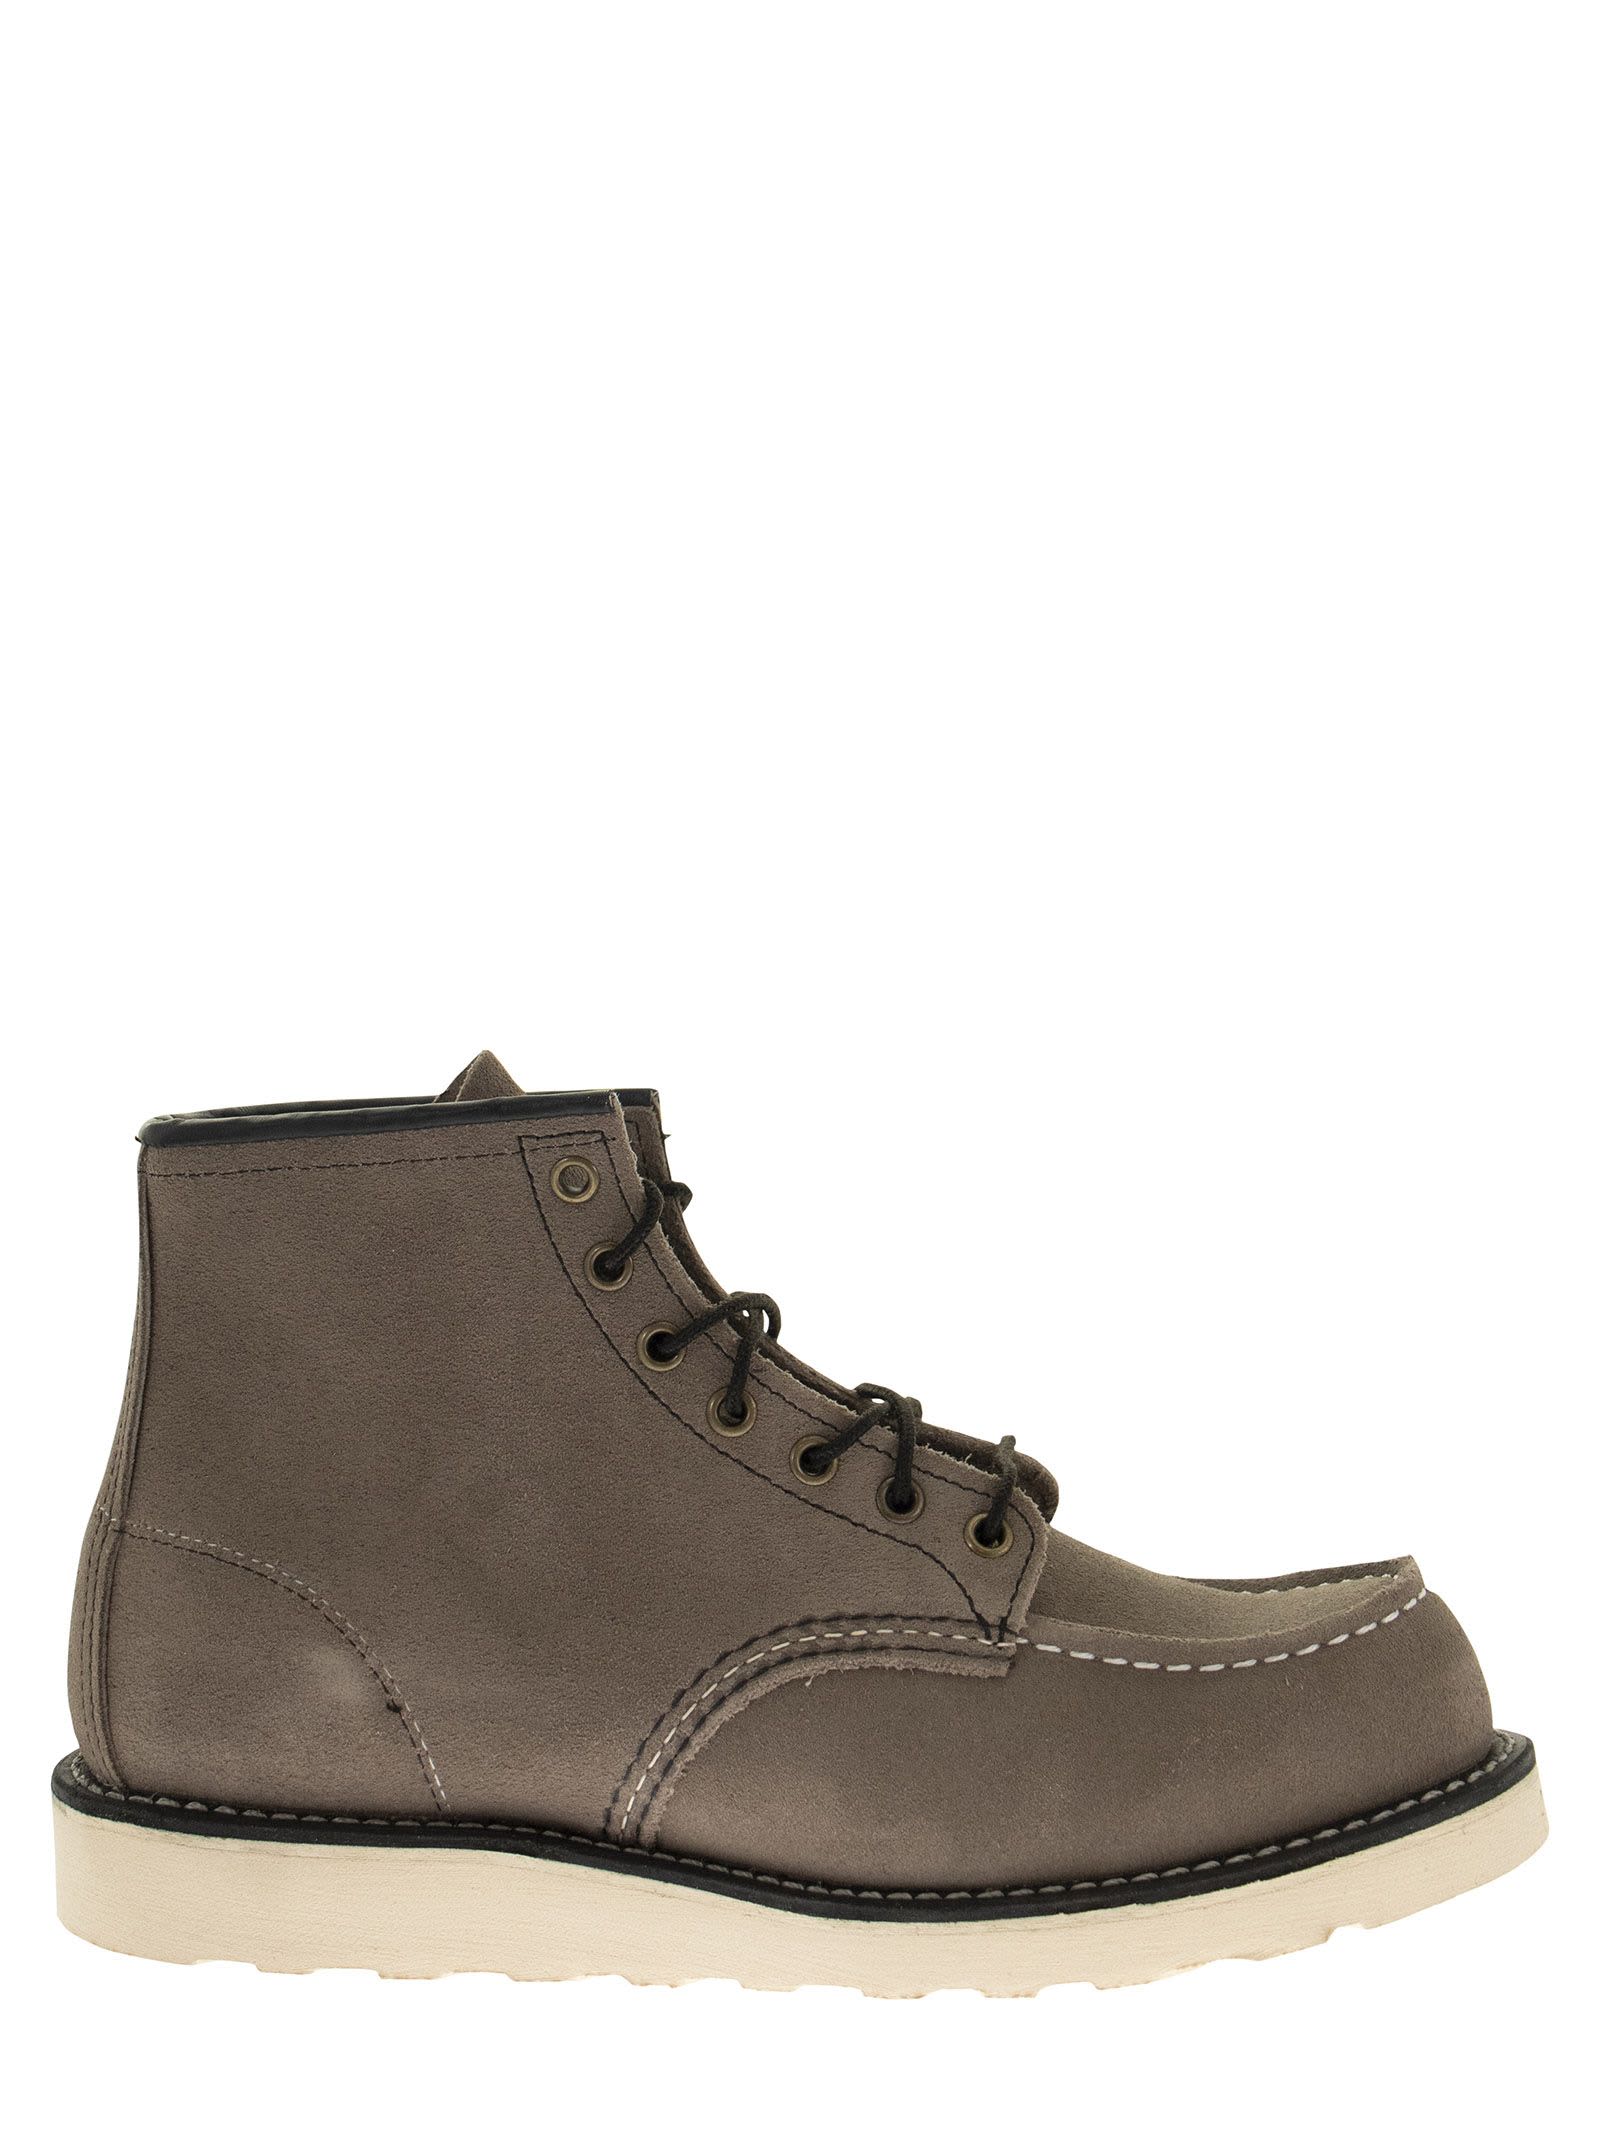 Red Wing Classic Moc 8863 - Lace-up Boot